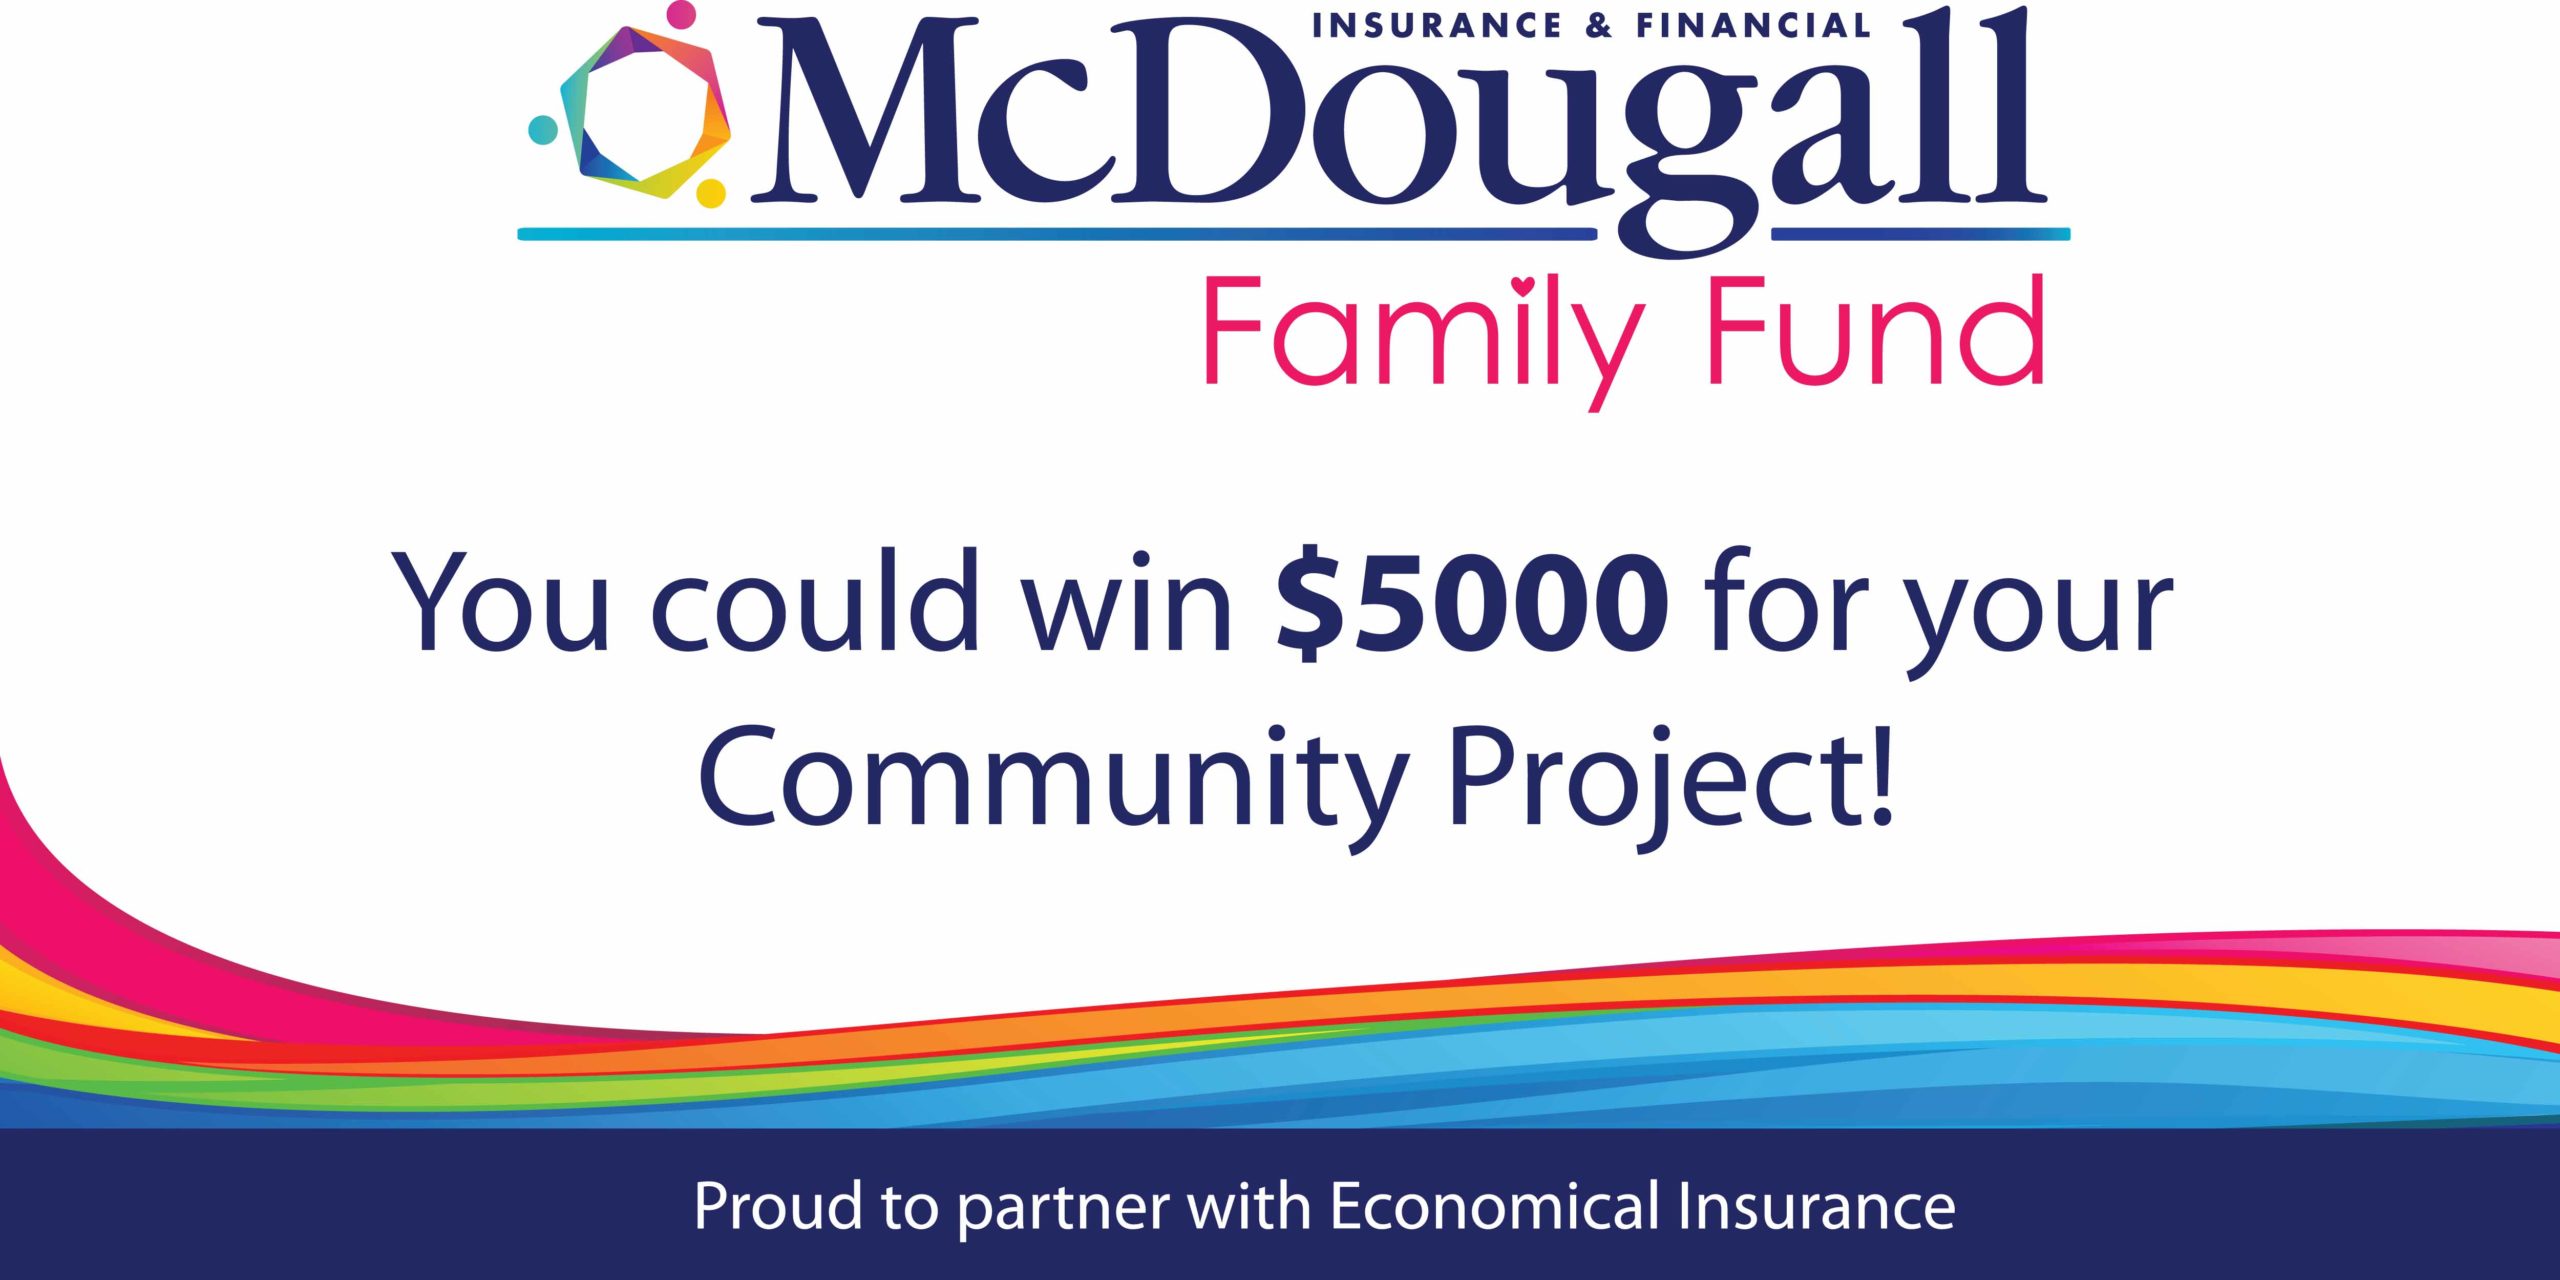 Facebook Ad for the McDougall Family Fund 2020 community project $5000 contest